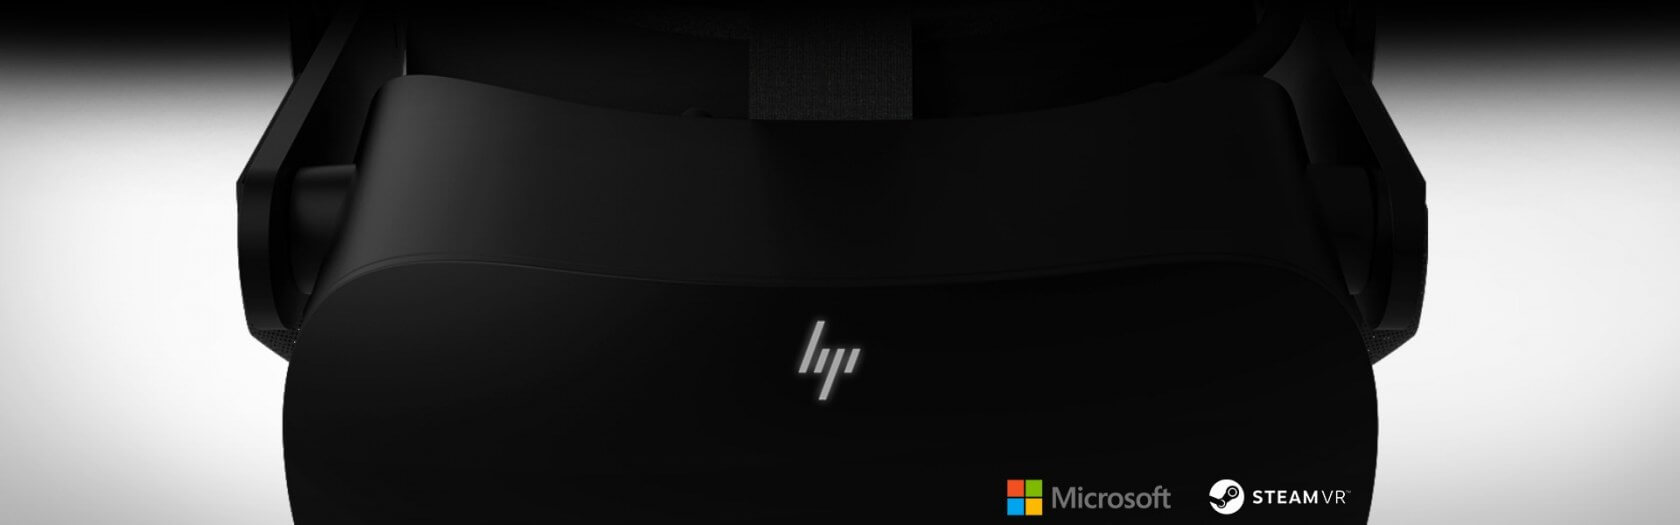 HP is teaming up with Valve and Microsoft to create a mysterious next-gen VR headset